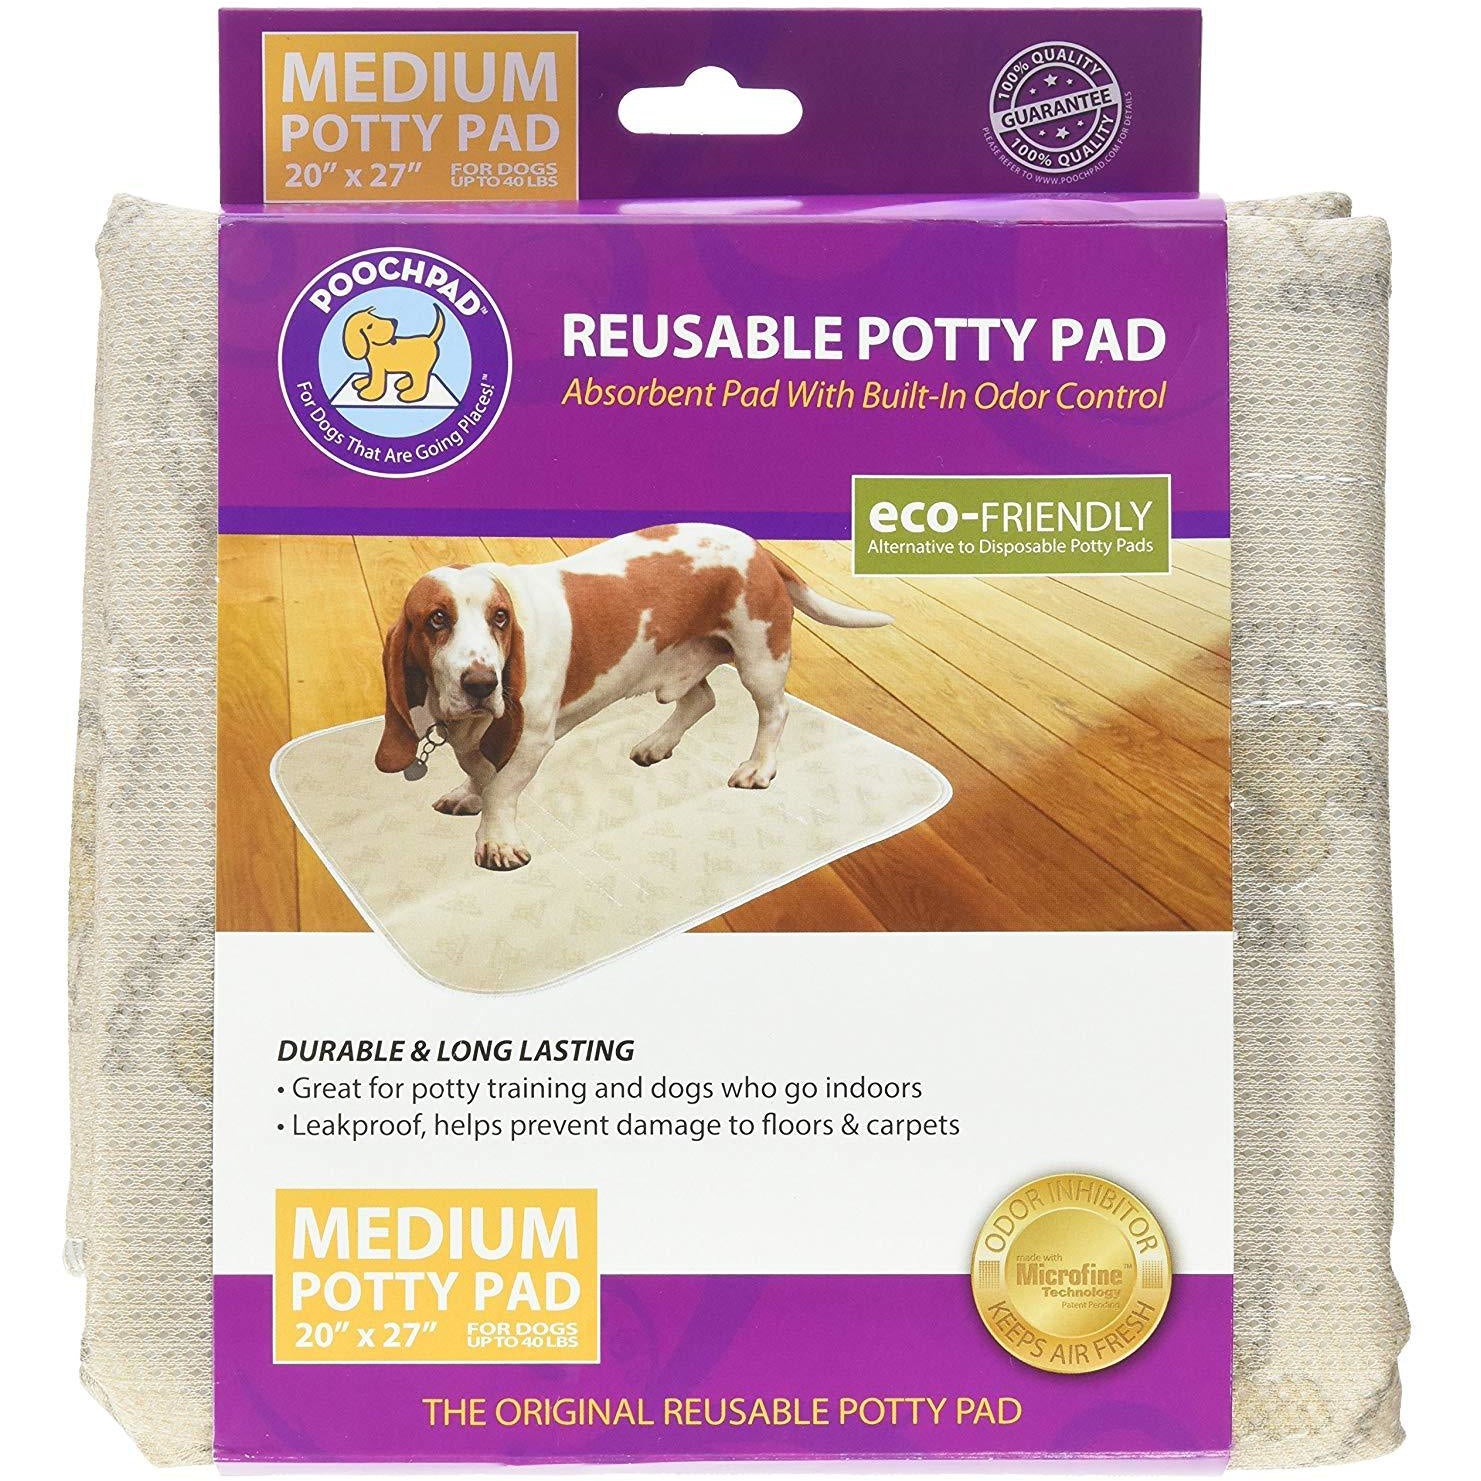 PoochPad Potty Training Pads